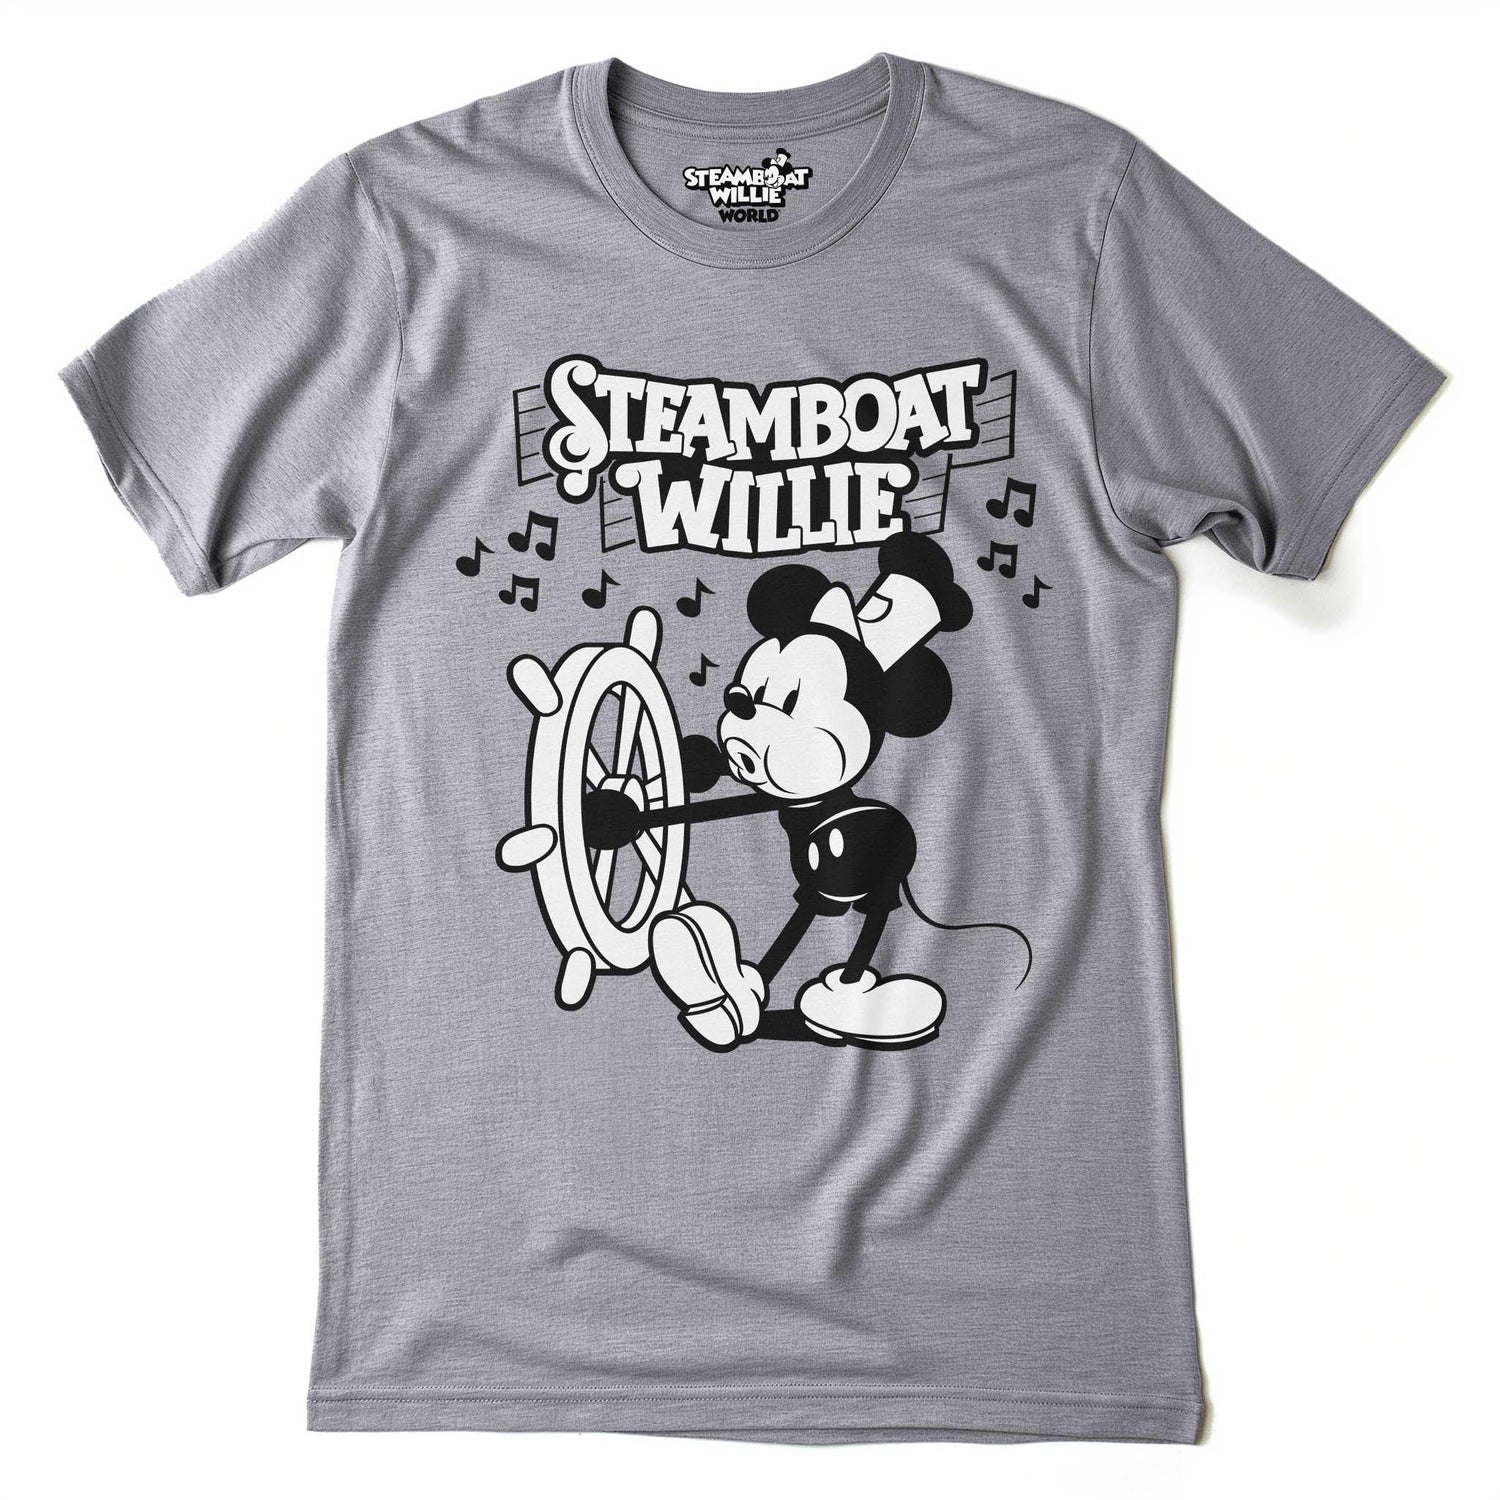 Willie Symphony Tee - Steamboat Willie World